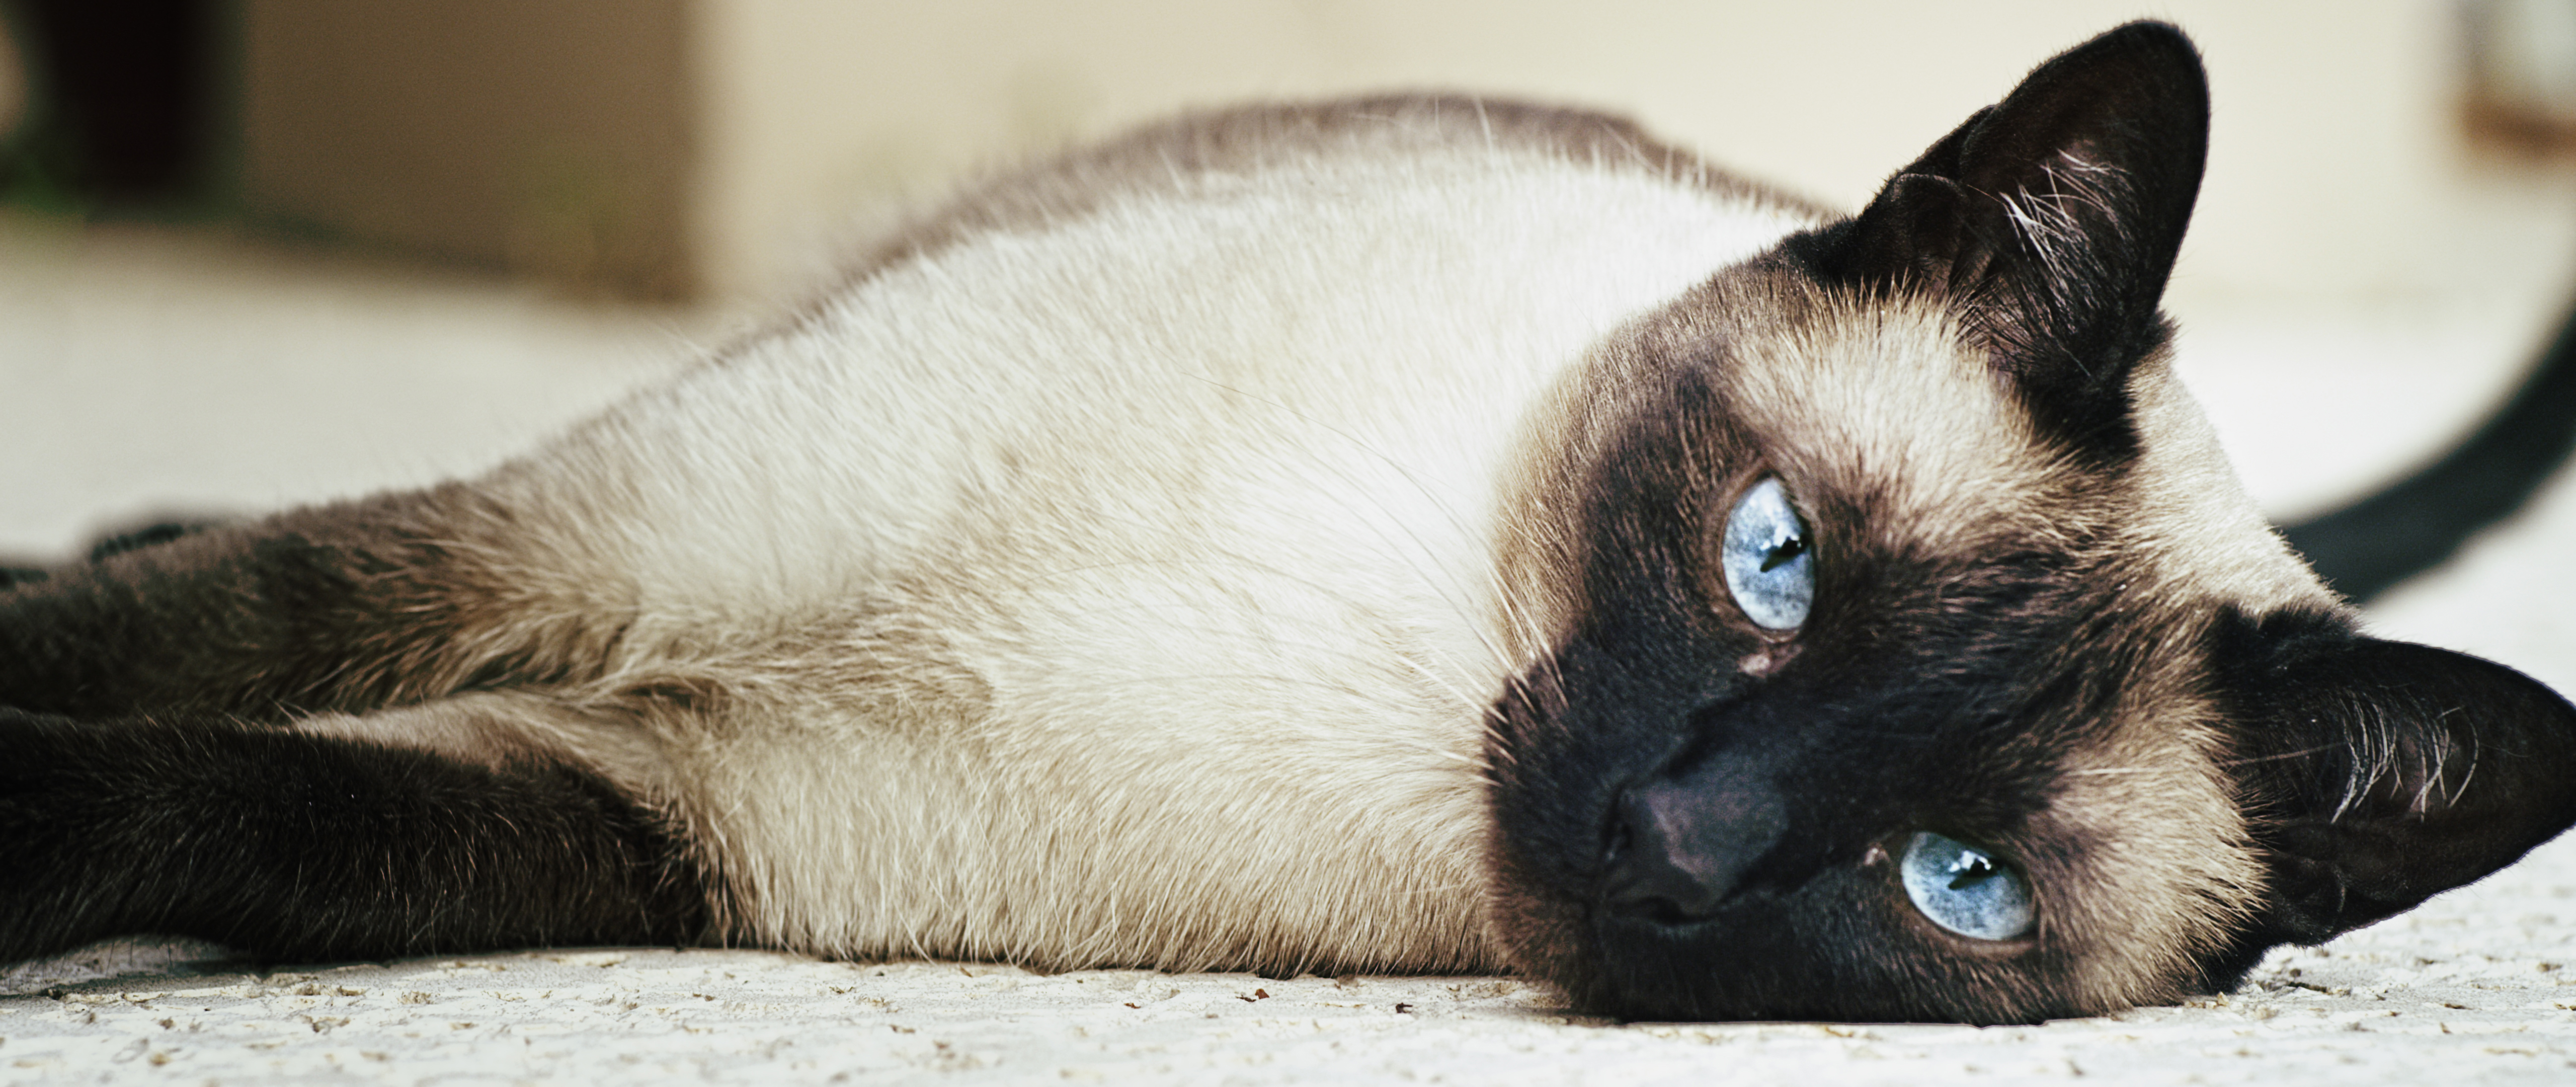 Amazing Siamese Cat Pictures & Backgrounds